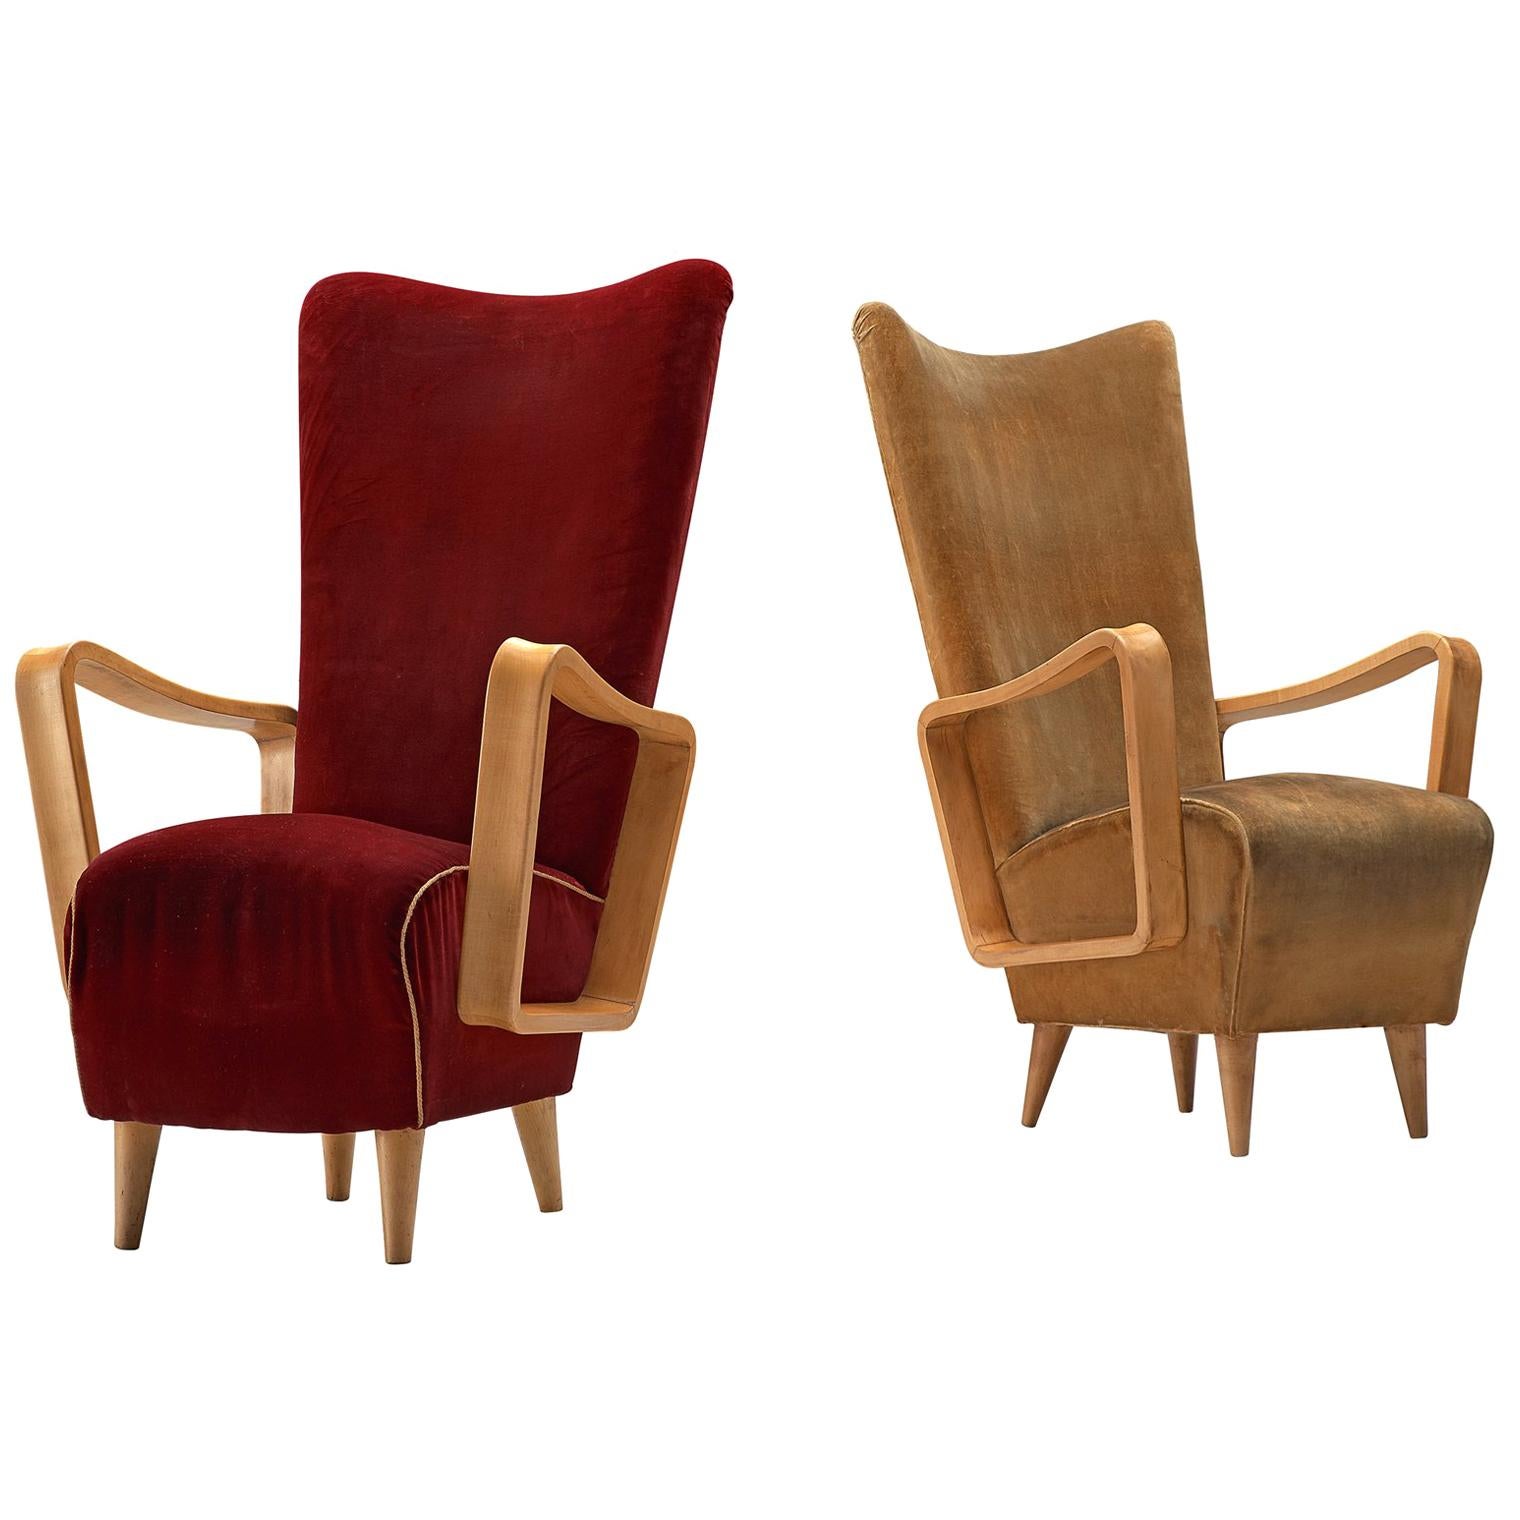 Pair of High Back Easy Chairs by Pietro Lingeri, 1950s